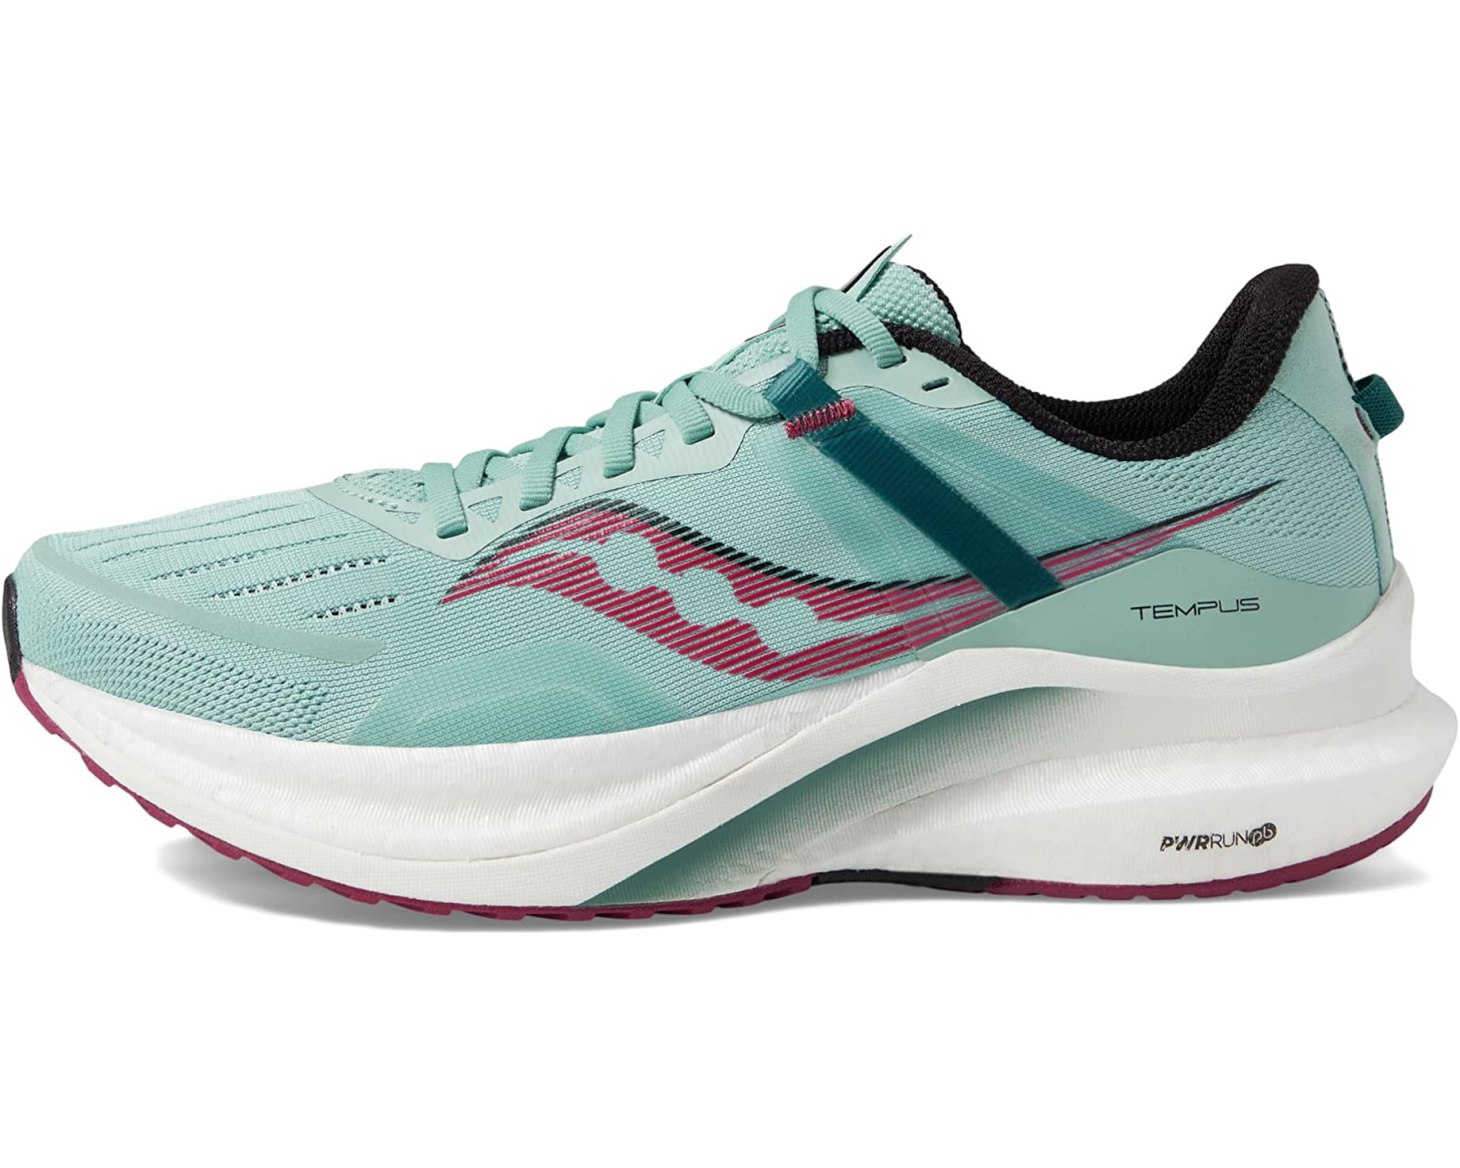 Saucony Tempus, one of the best sneakers for knee pain